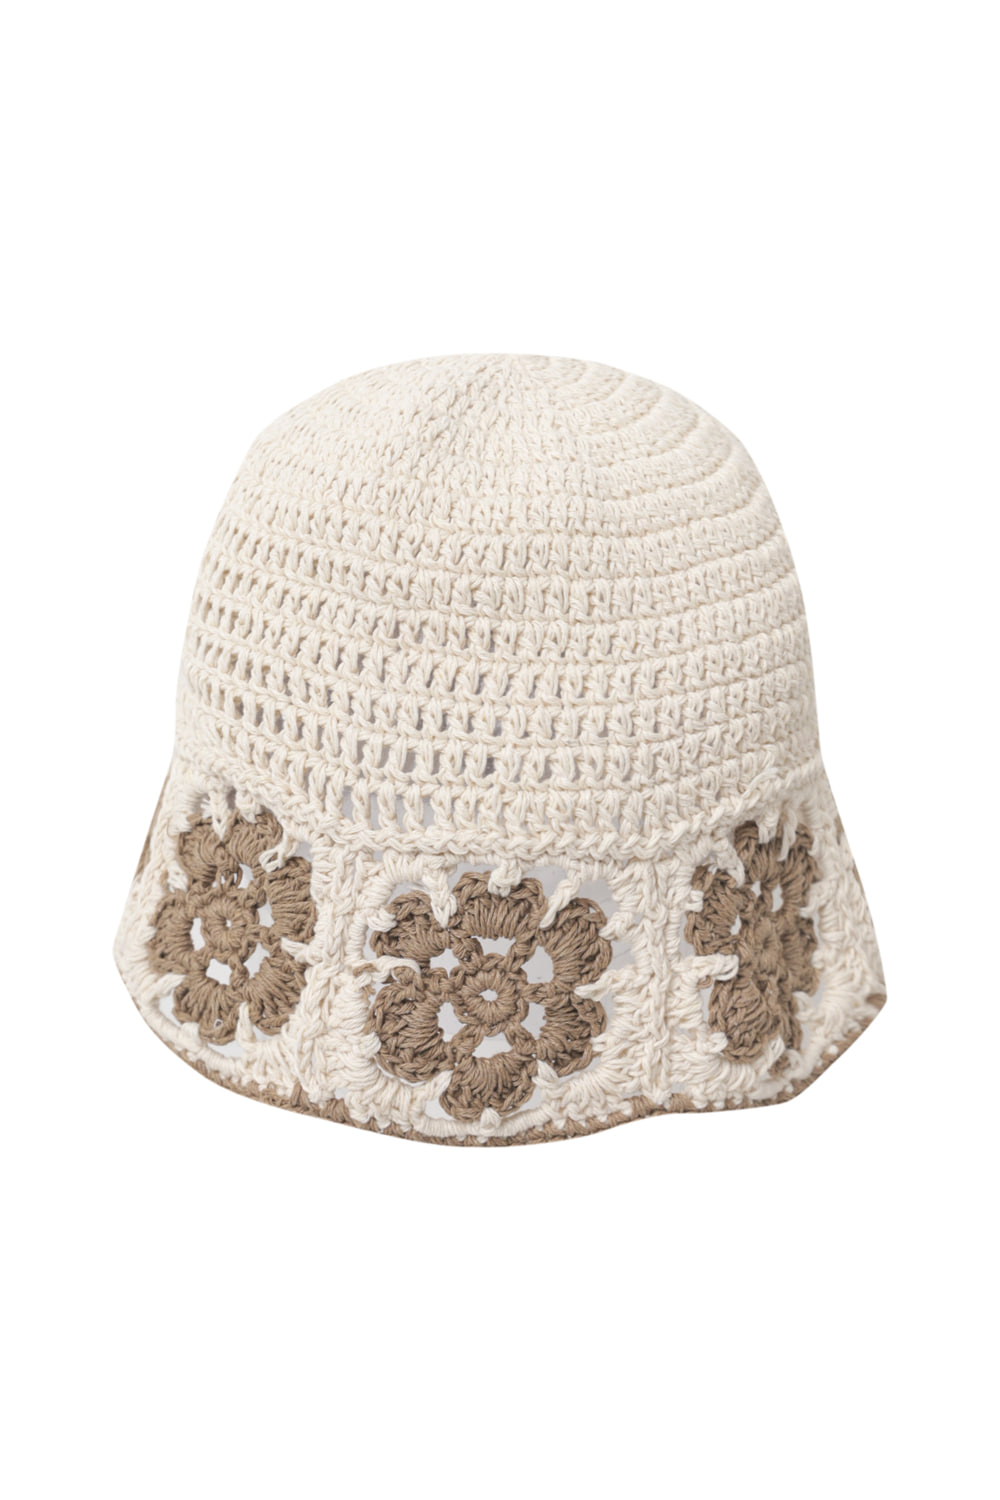 Aria Hand Embroidered Bucket Hat (Ivory)